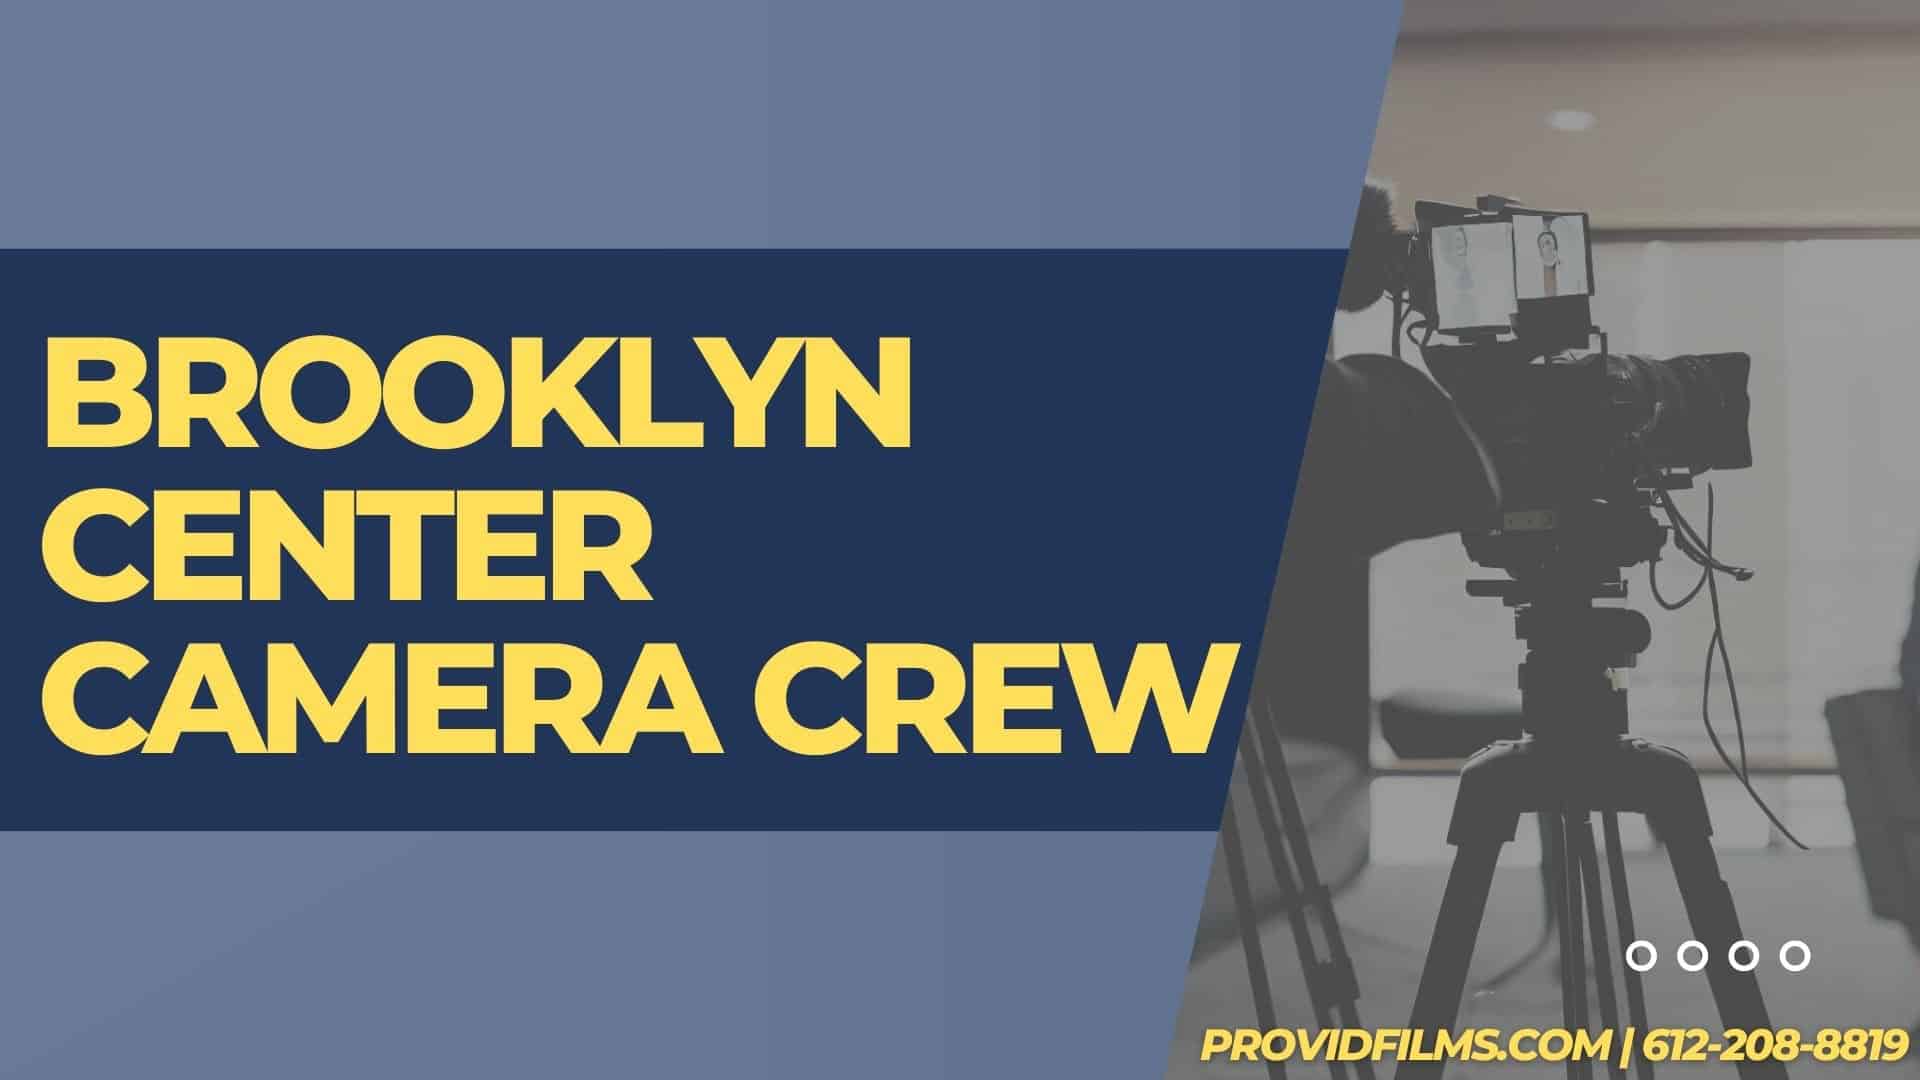 Graphic of a video camera with the text saying "Brooklyn Center  Camera Crew"